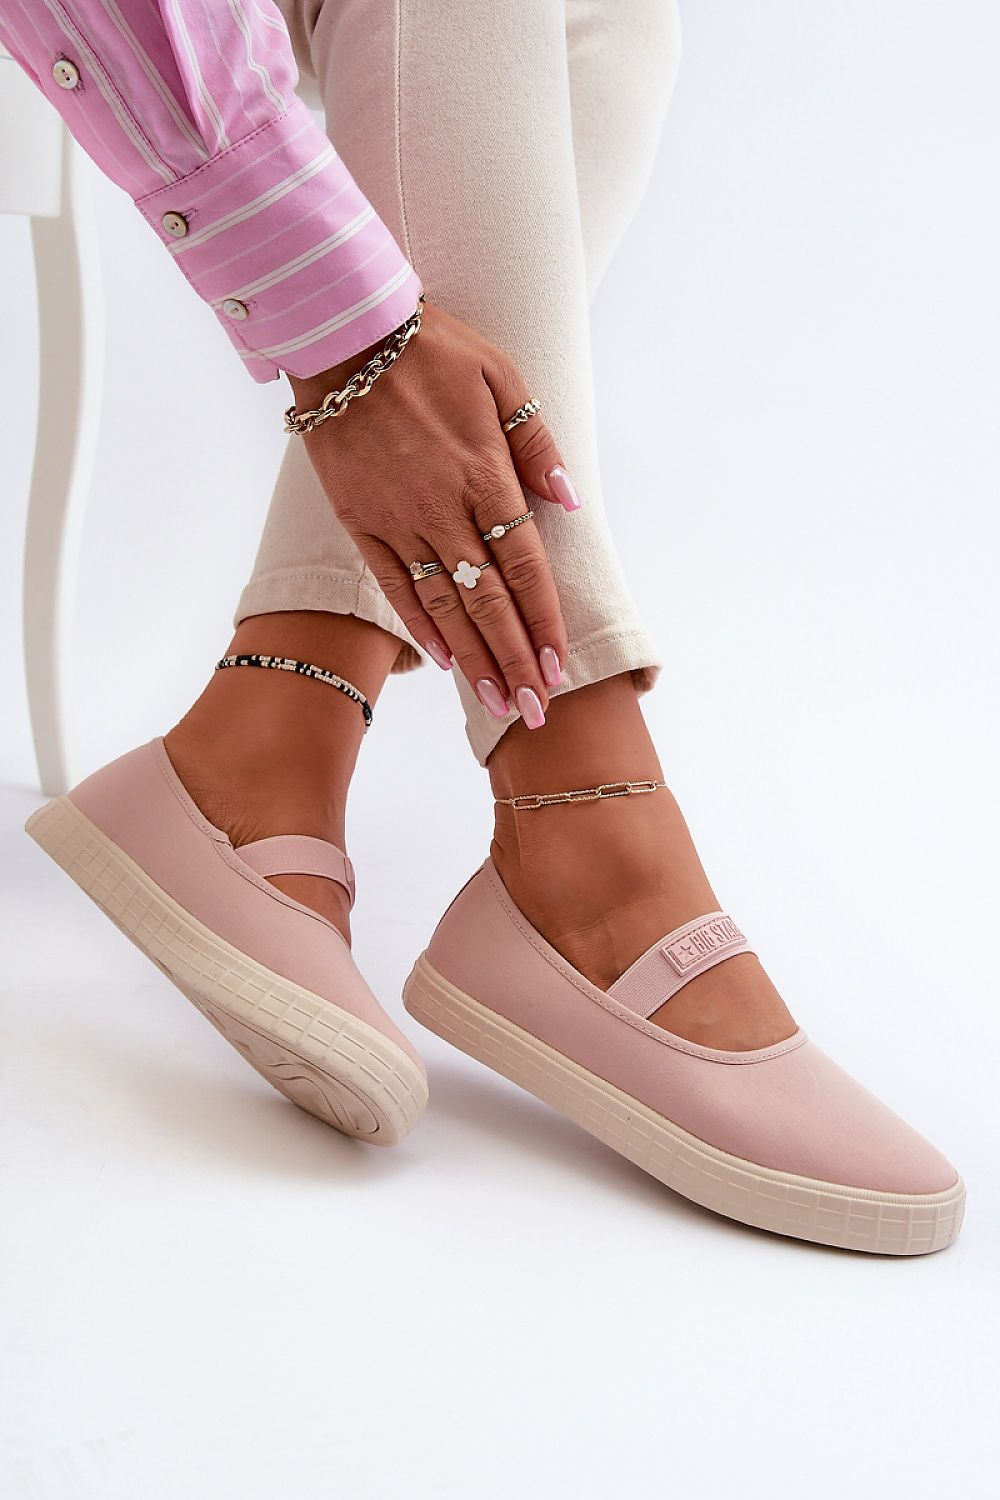 Ballerina Style  Shoes